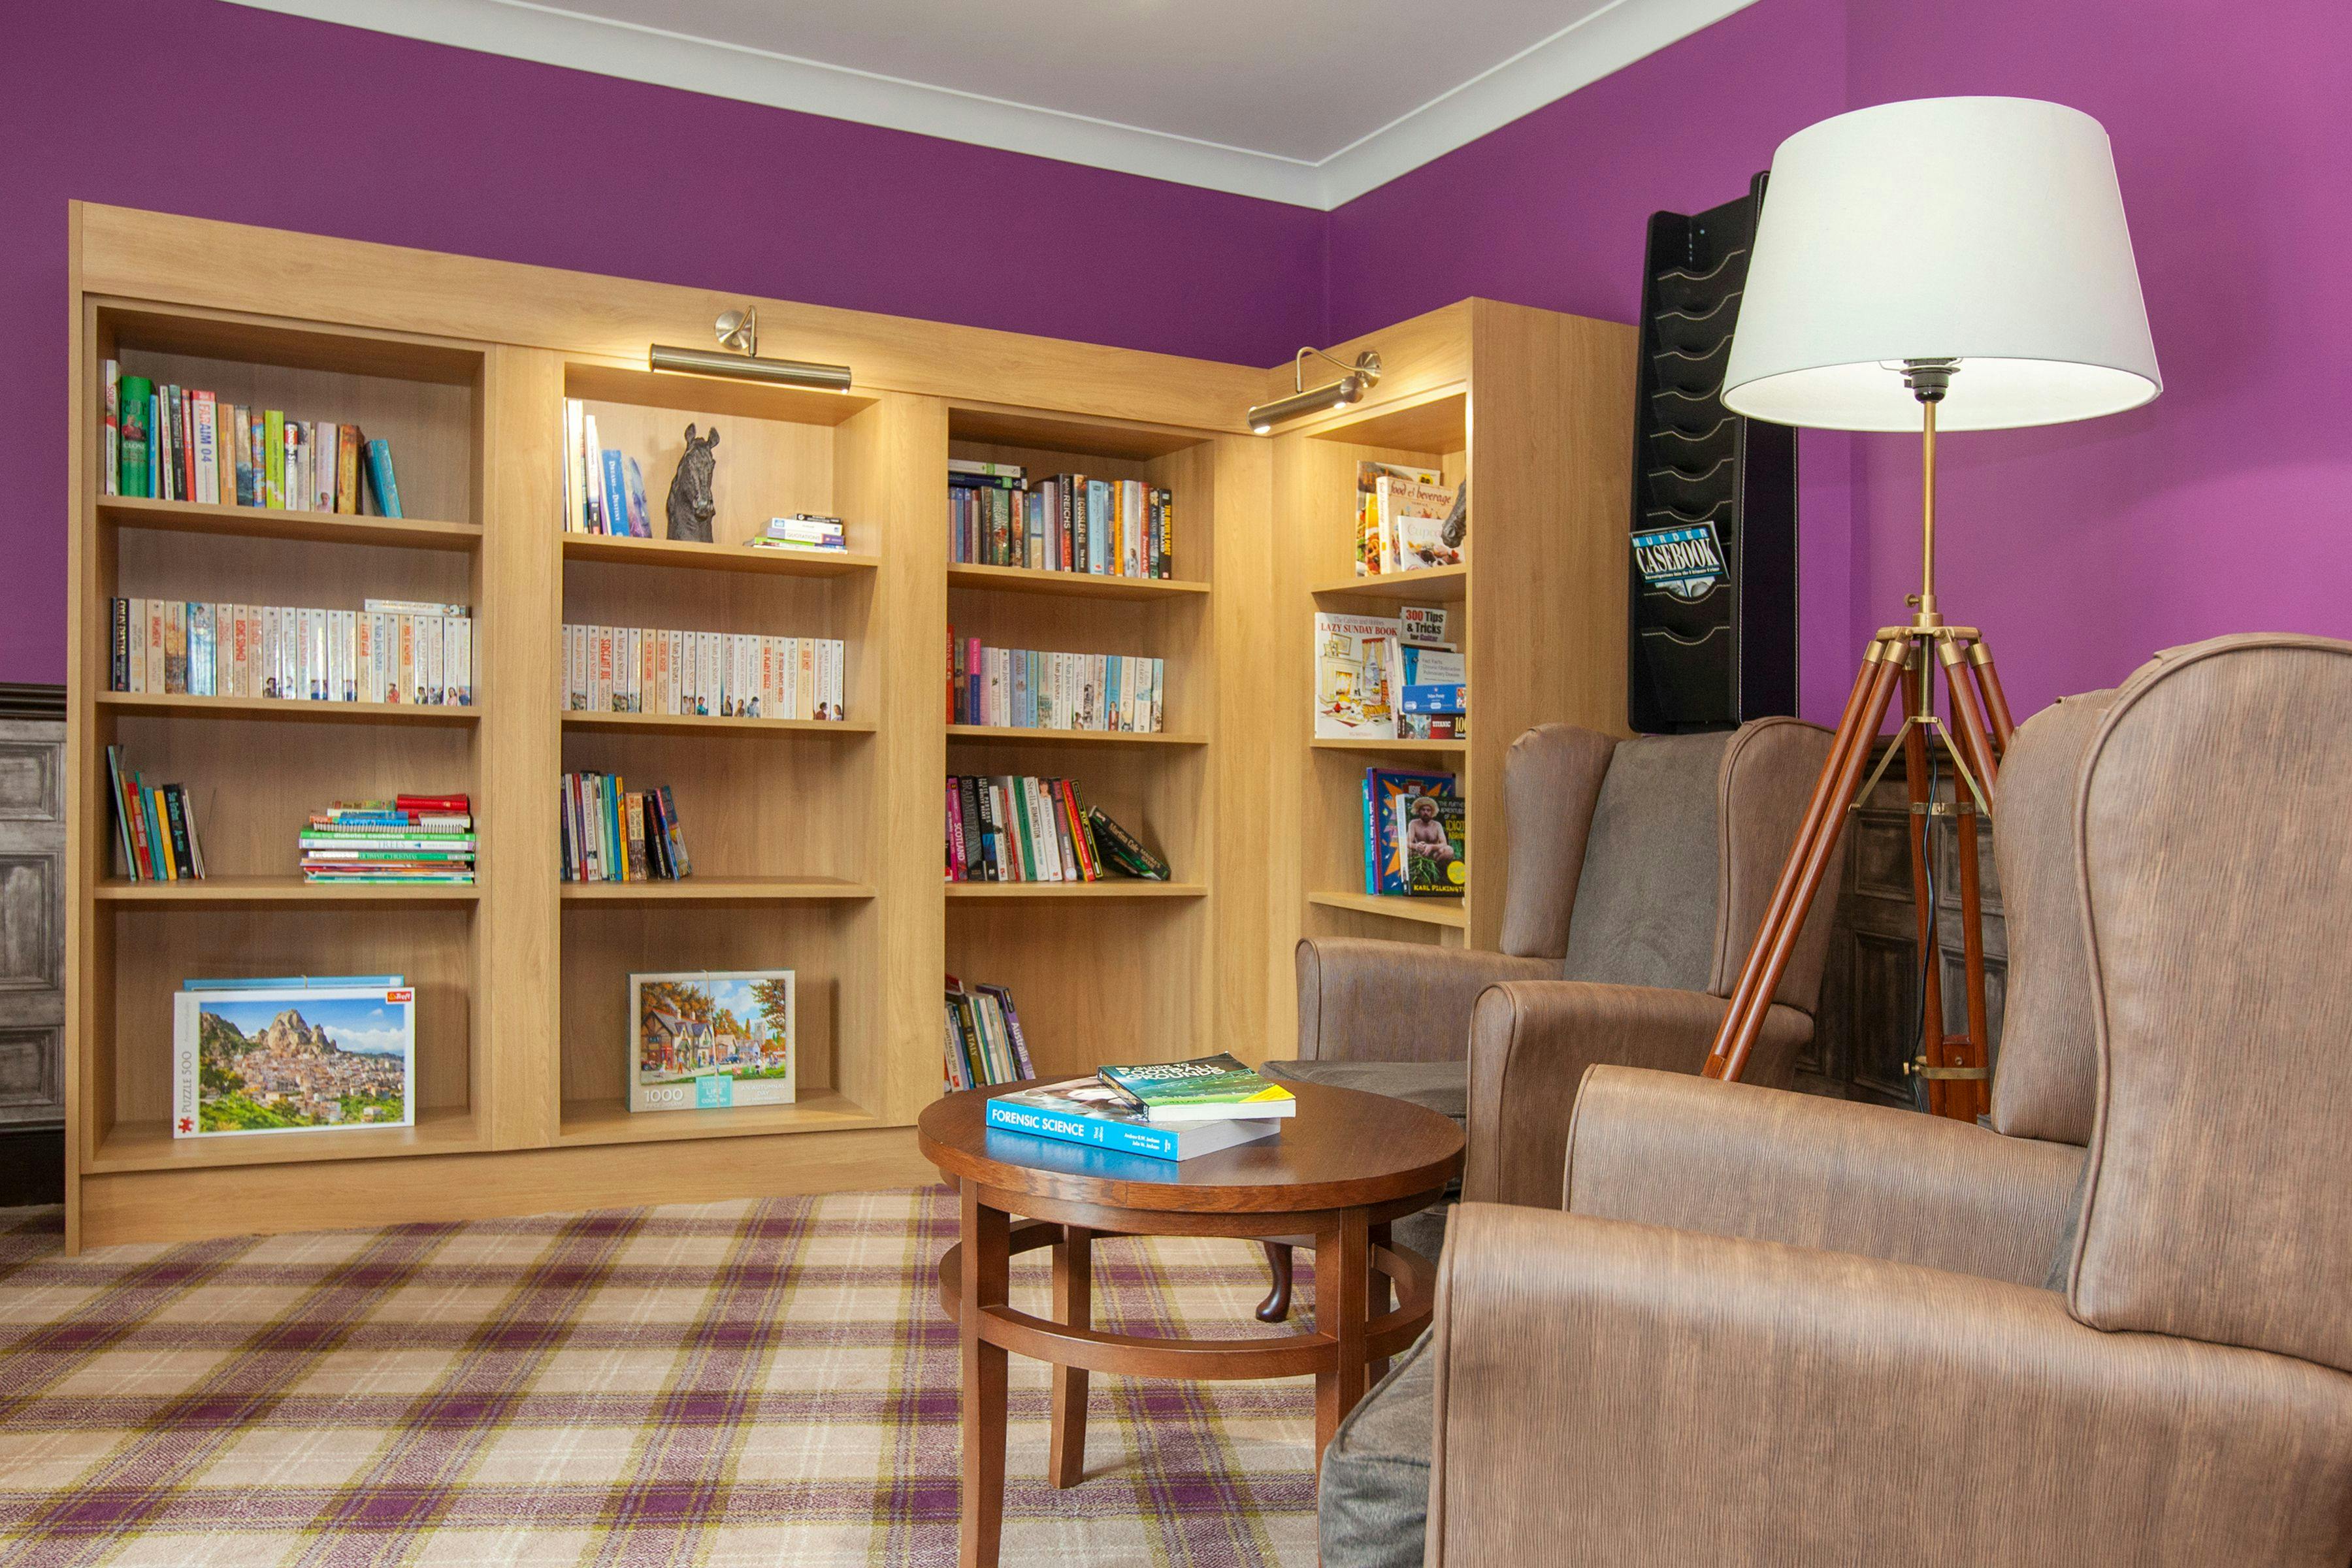 Library Bedroom at Briggs Lodge Care Home in Devizes, Wiltshire